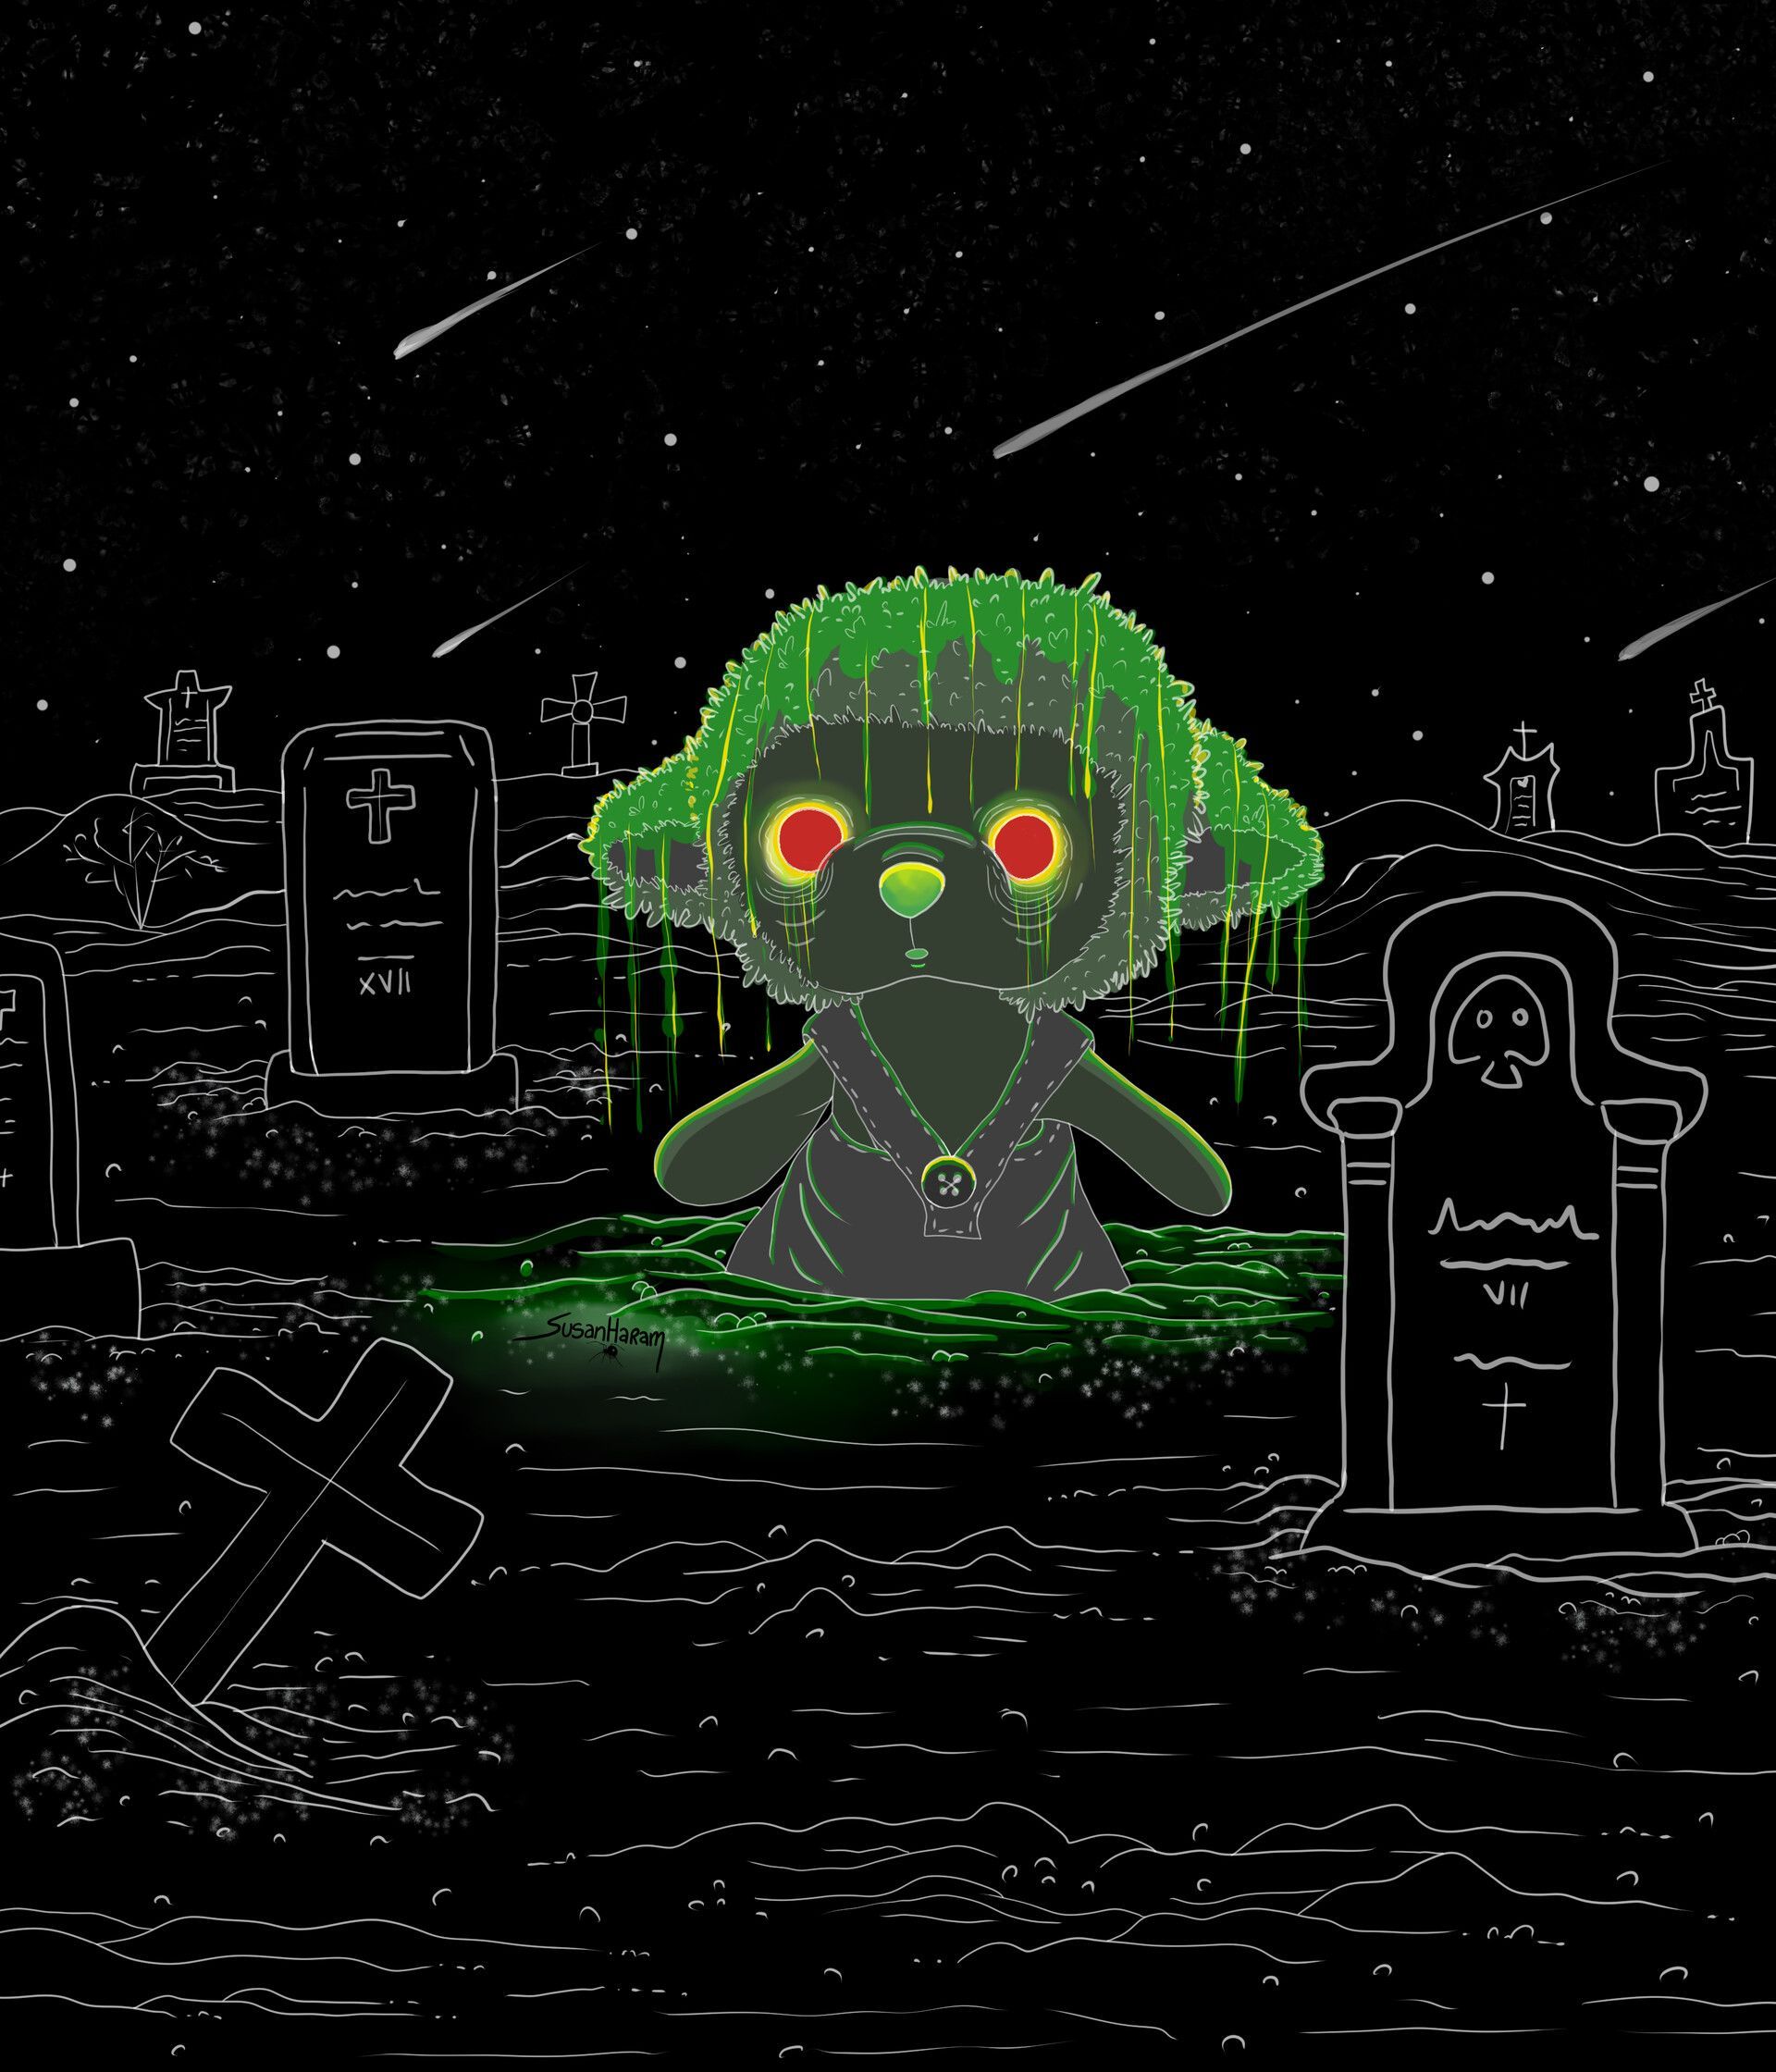 A zombie bear in a cemetery, surrounded by gravestones - Baby Yoda